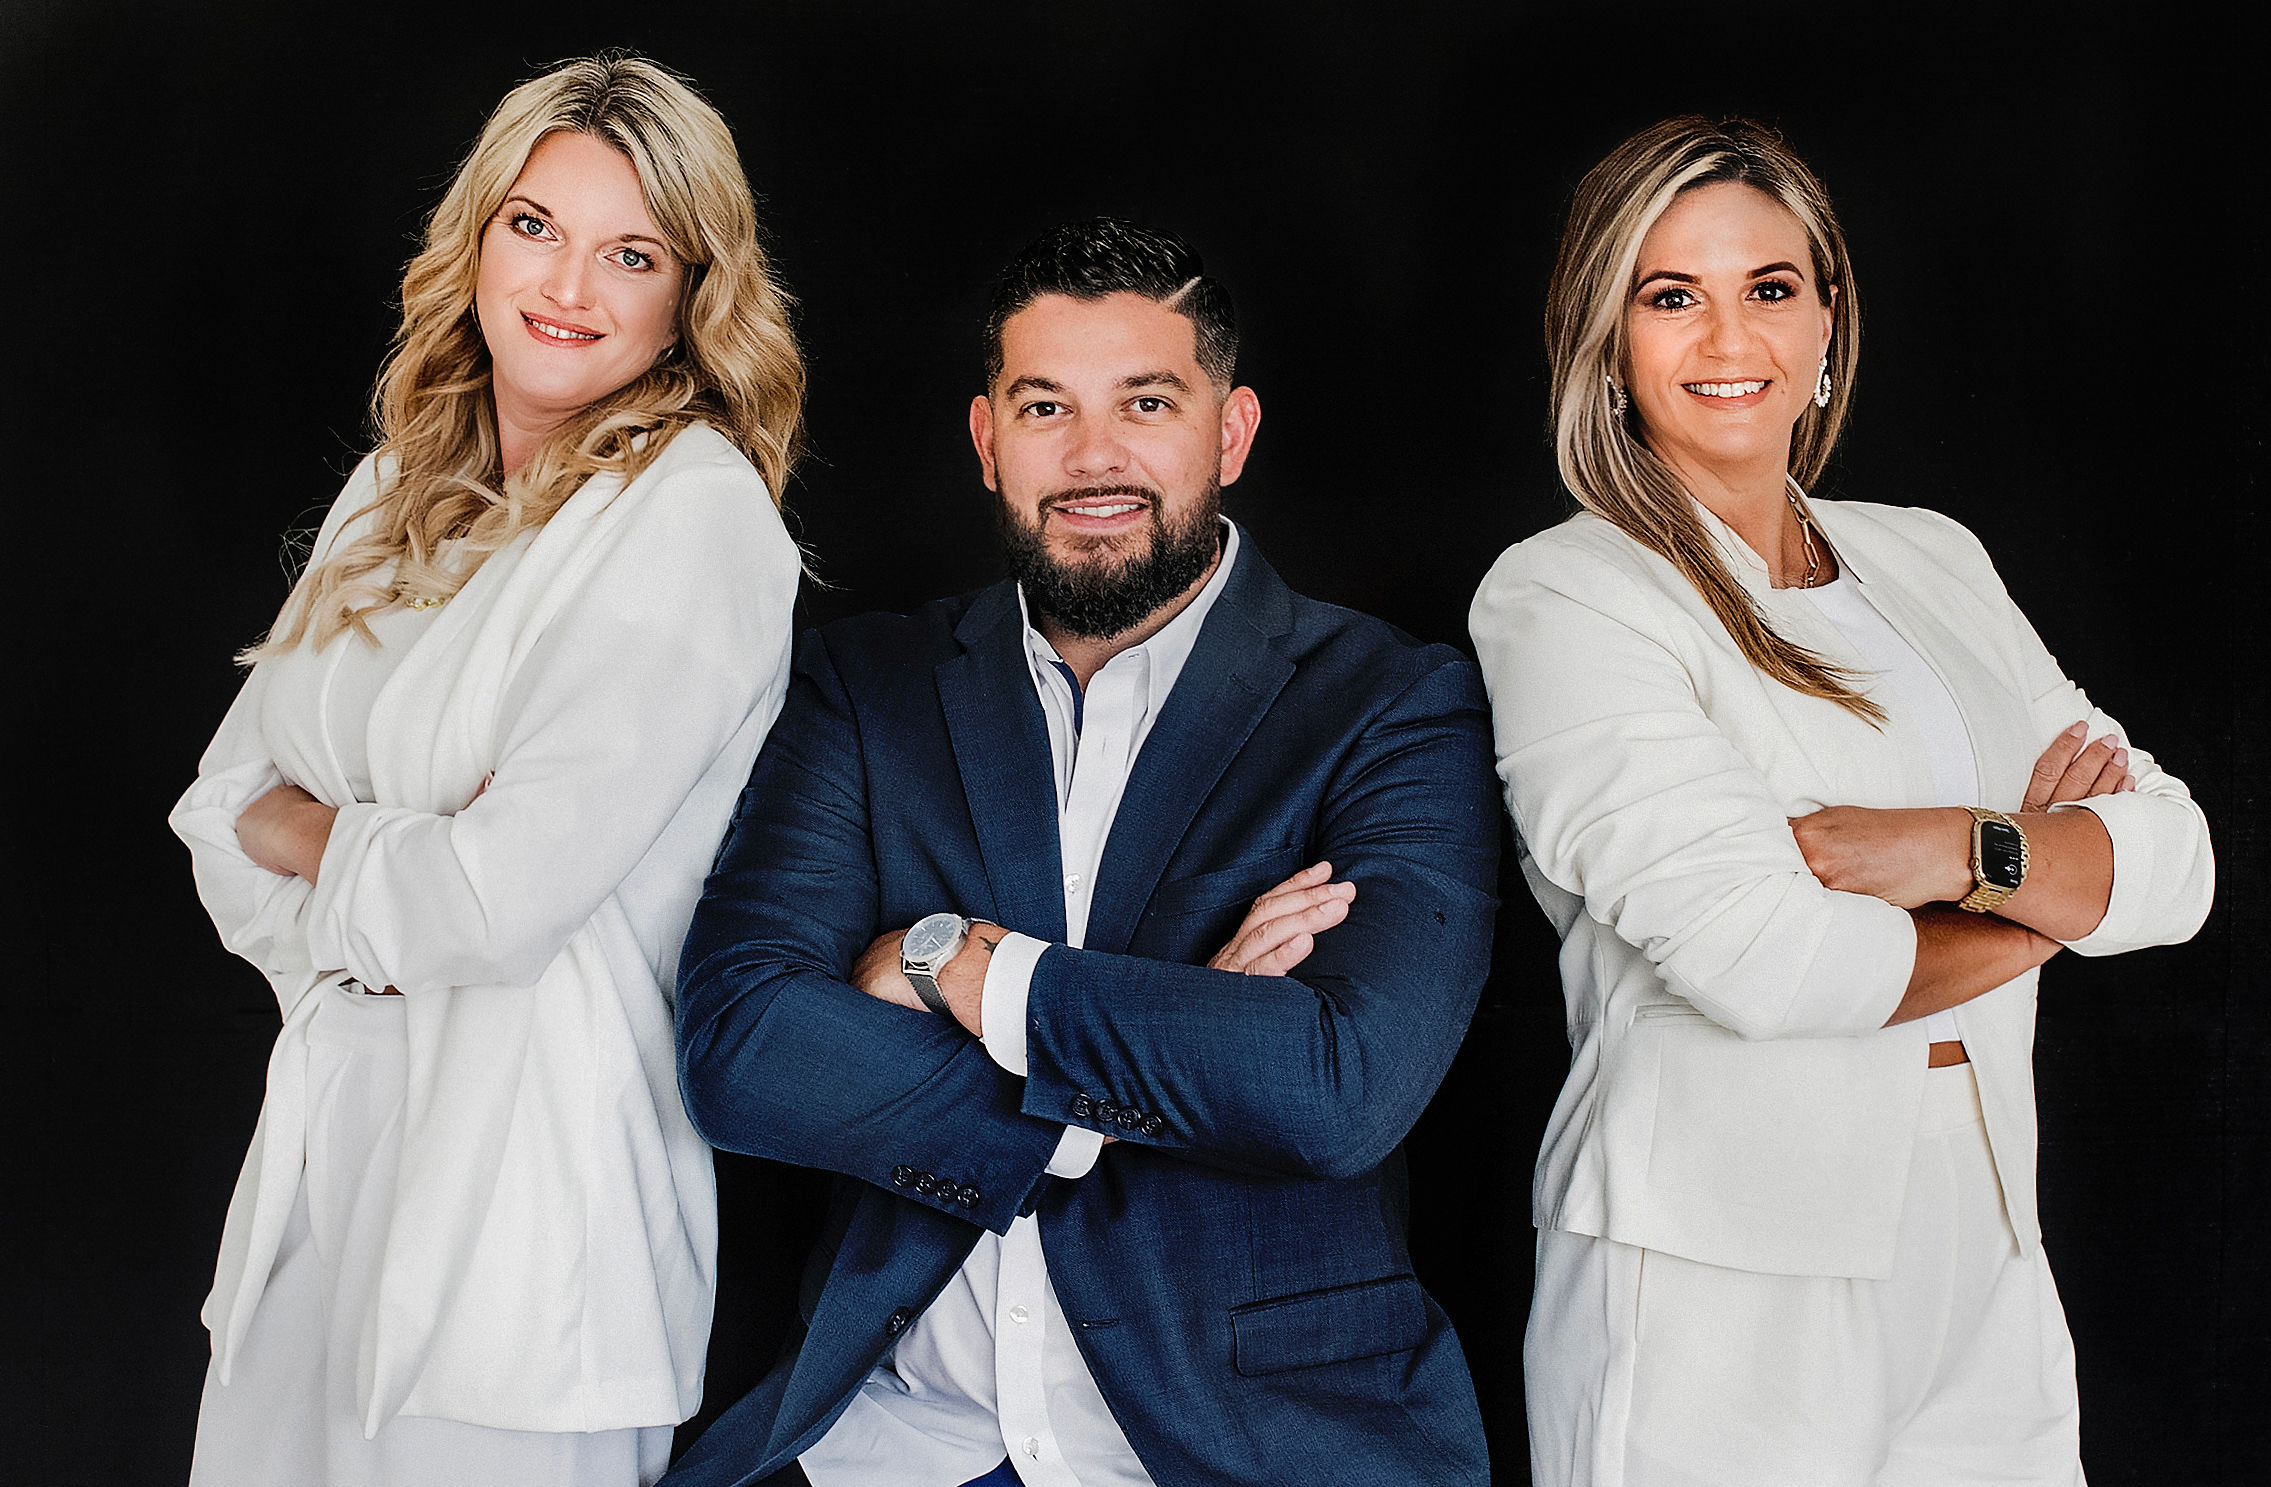 The Gray Group in Cookeville consists of real estate agents Josh Gray, Amanda Richards, and Eden Davis.